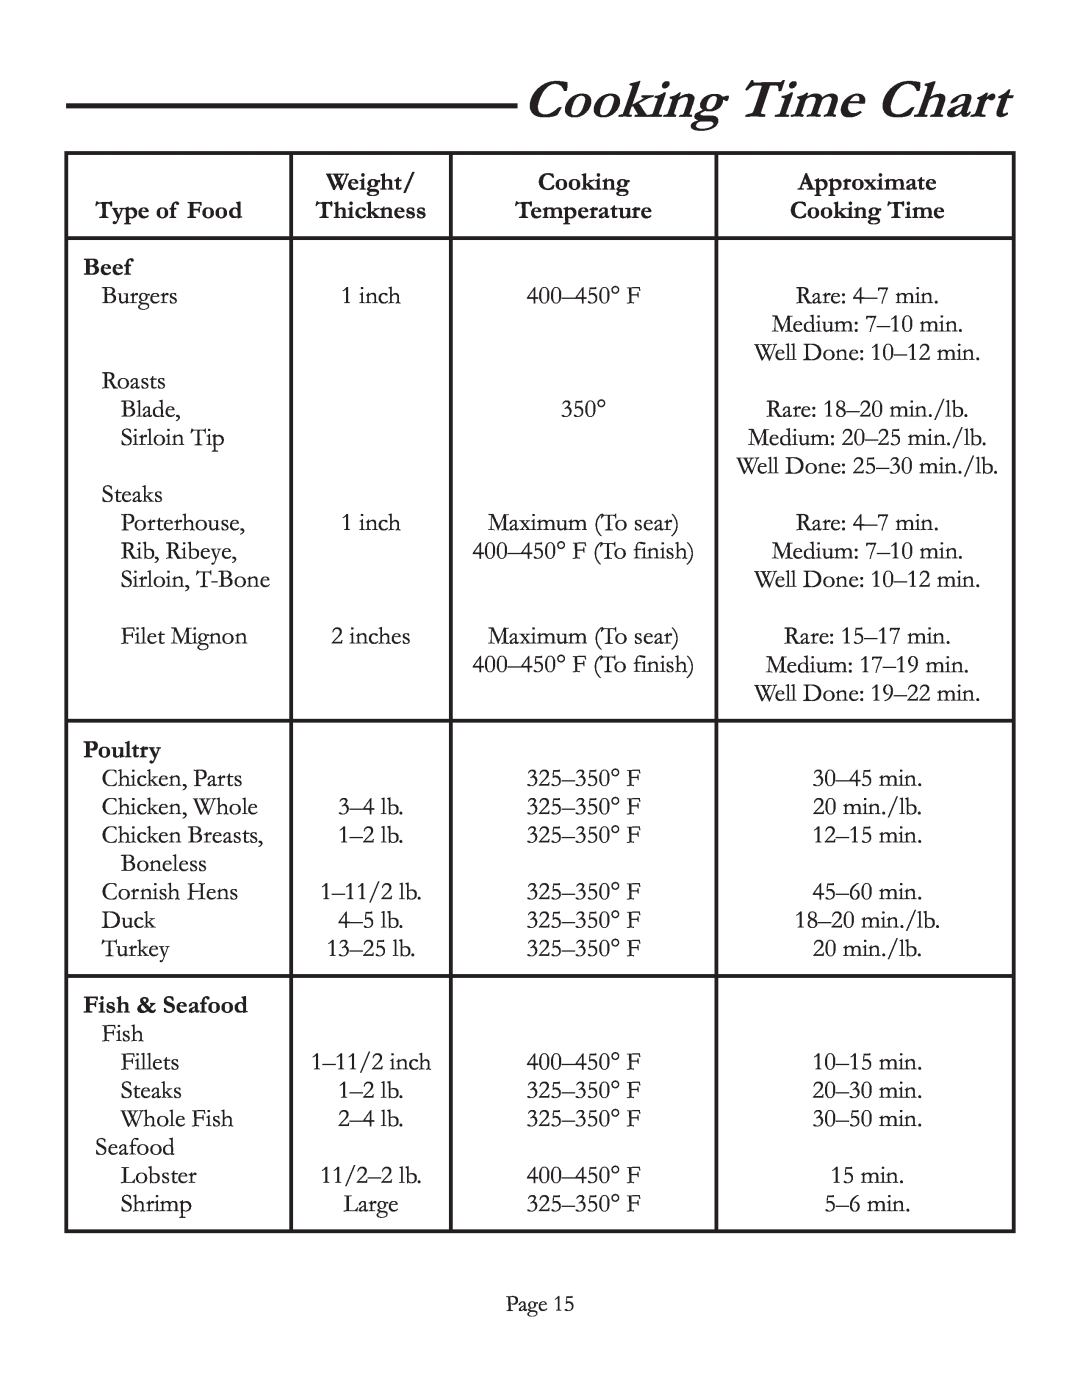 Vermont Casting VCS5016 Cooking Time Chart, Weight, Approximate, Type of Food, Thickness, Beef, Poultry, Fish & Seafood 